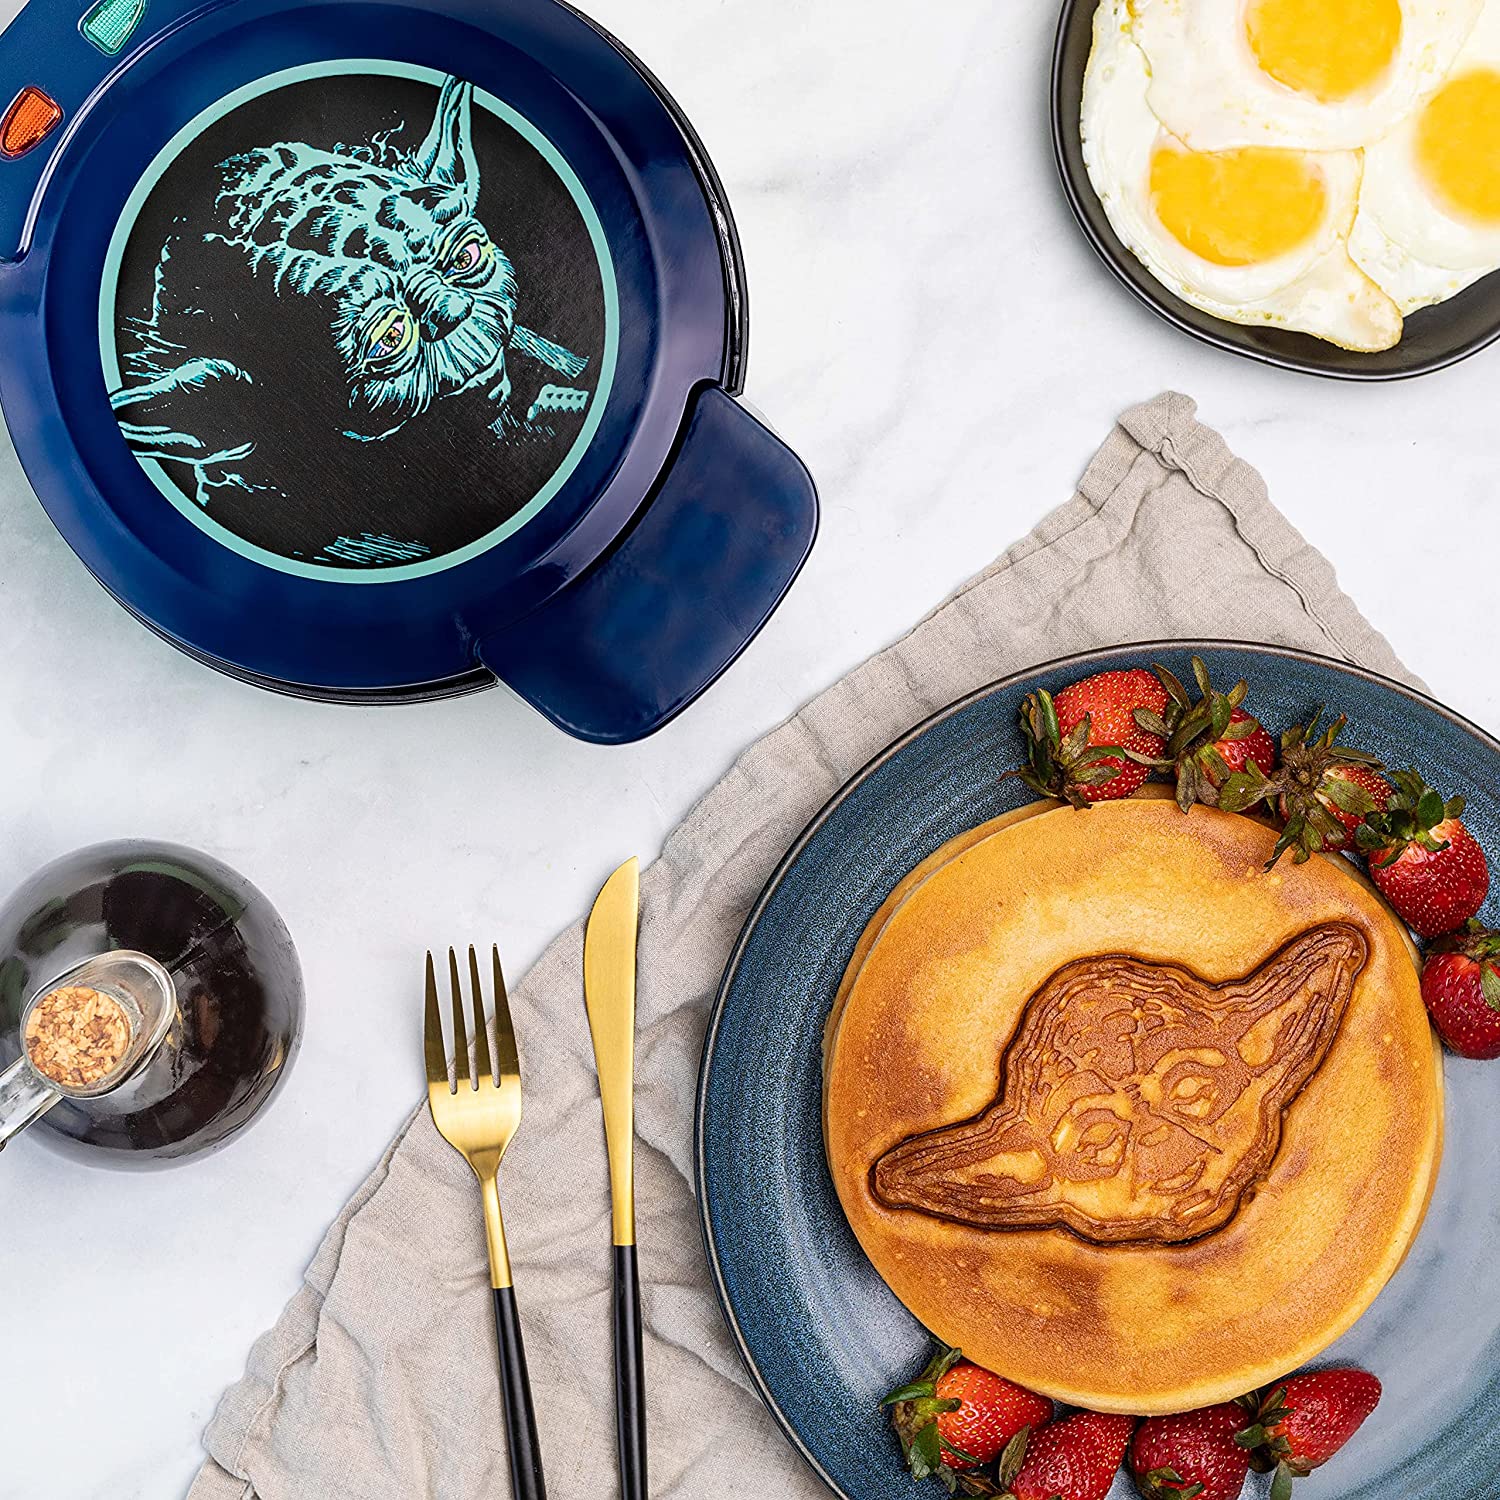 This Baby Yoda Waffle Maker Will Stamp The Child Onto Your Breakfast